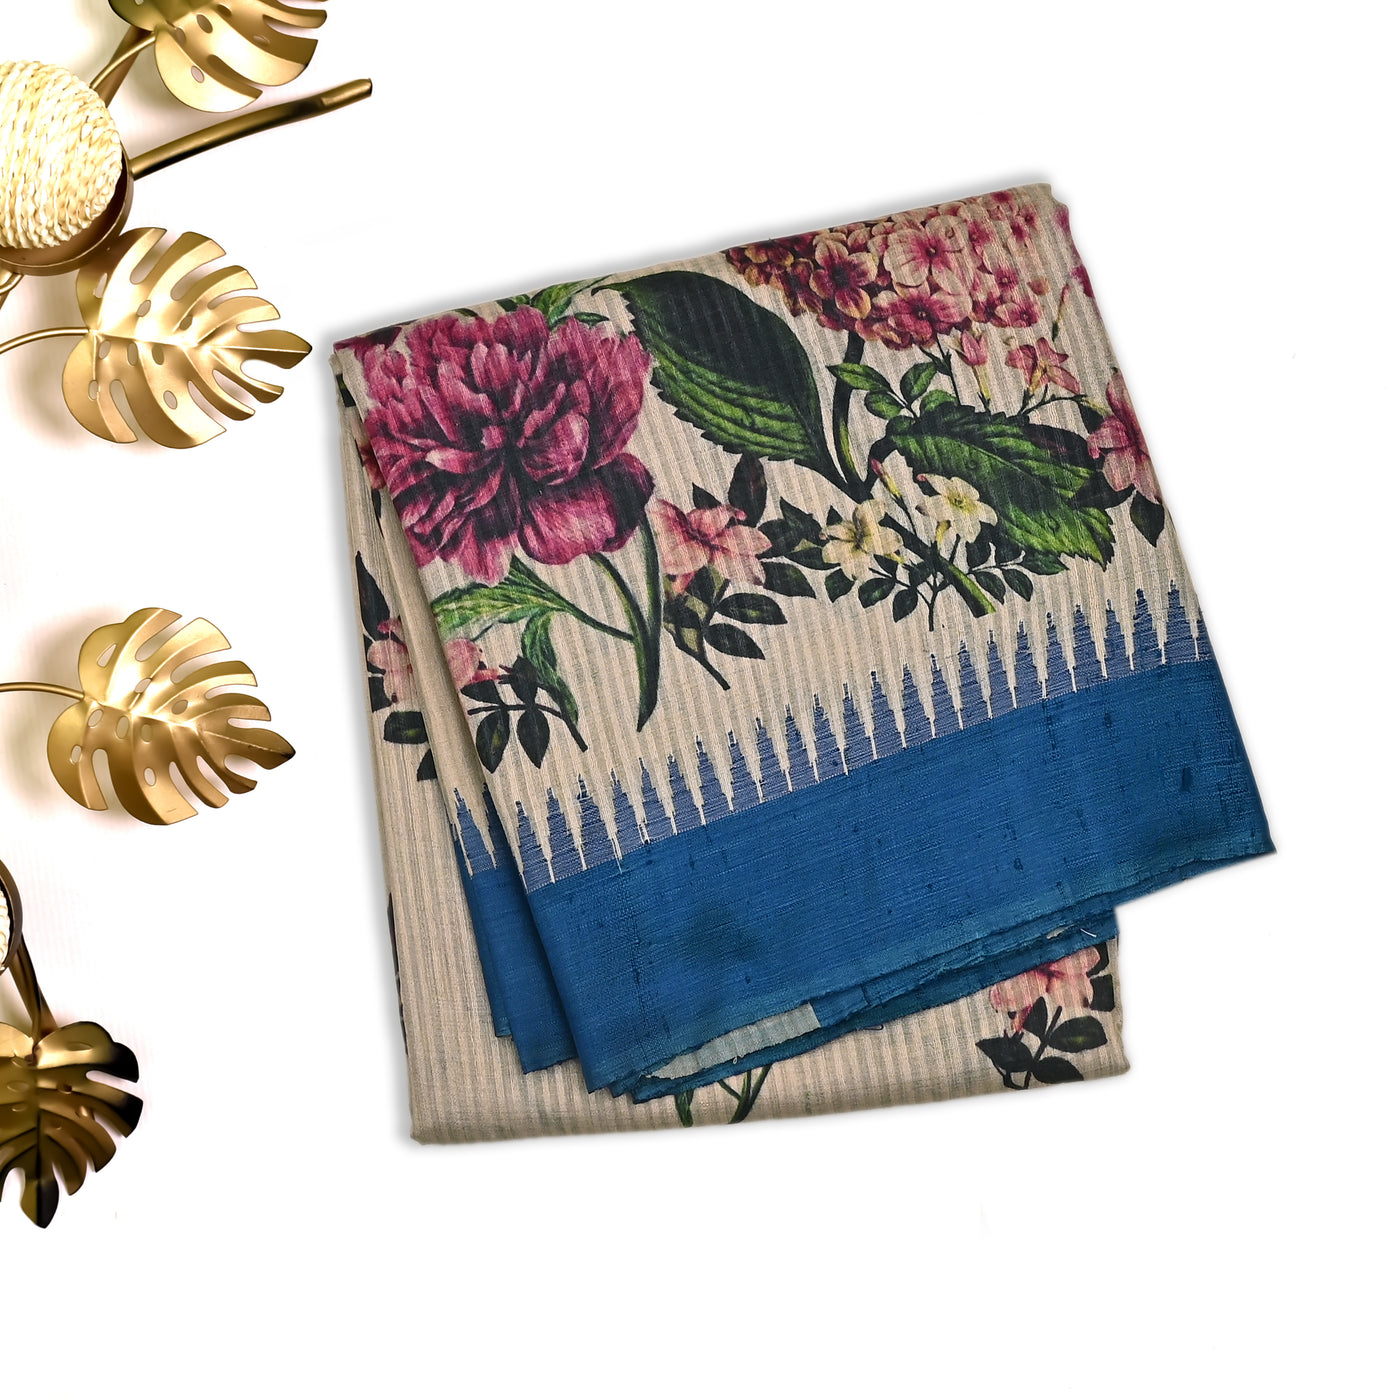 Off White Tussar Silk Saree with Floral Printed Design